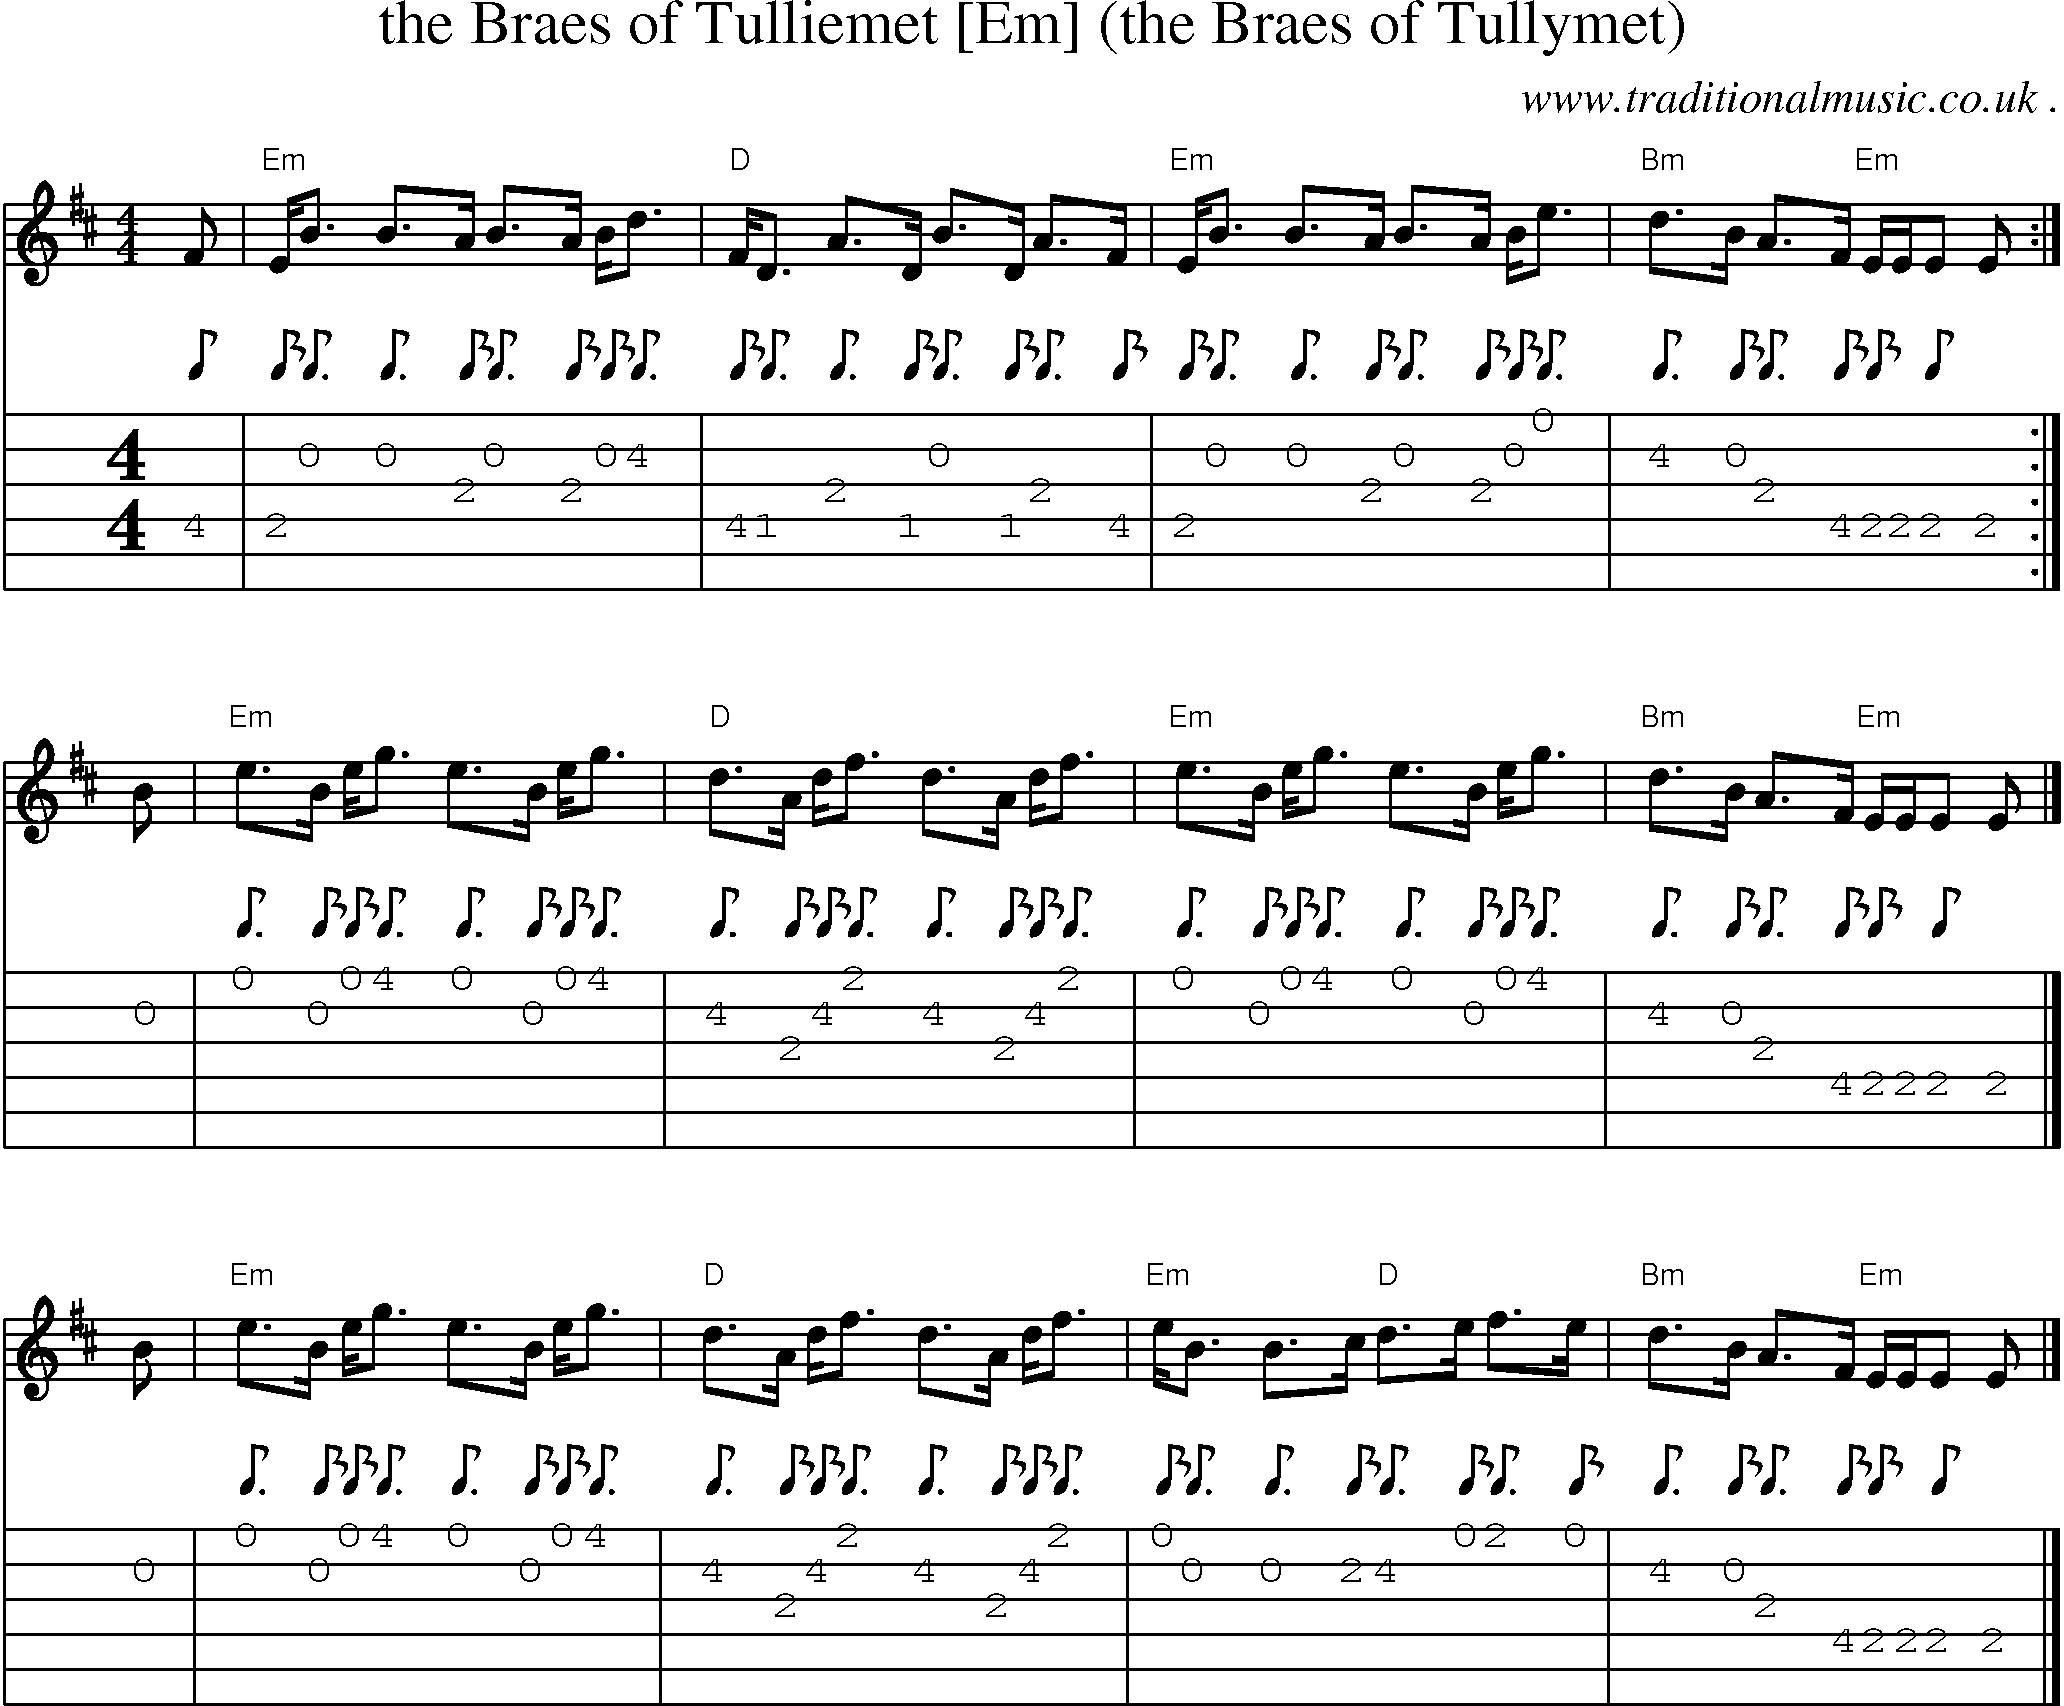 Sheet-music  score, Chords and Guitar Tabs for The Braes Of Tulliemet [em] The Braes Of Tullymet